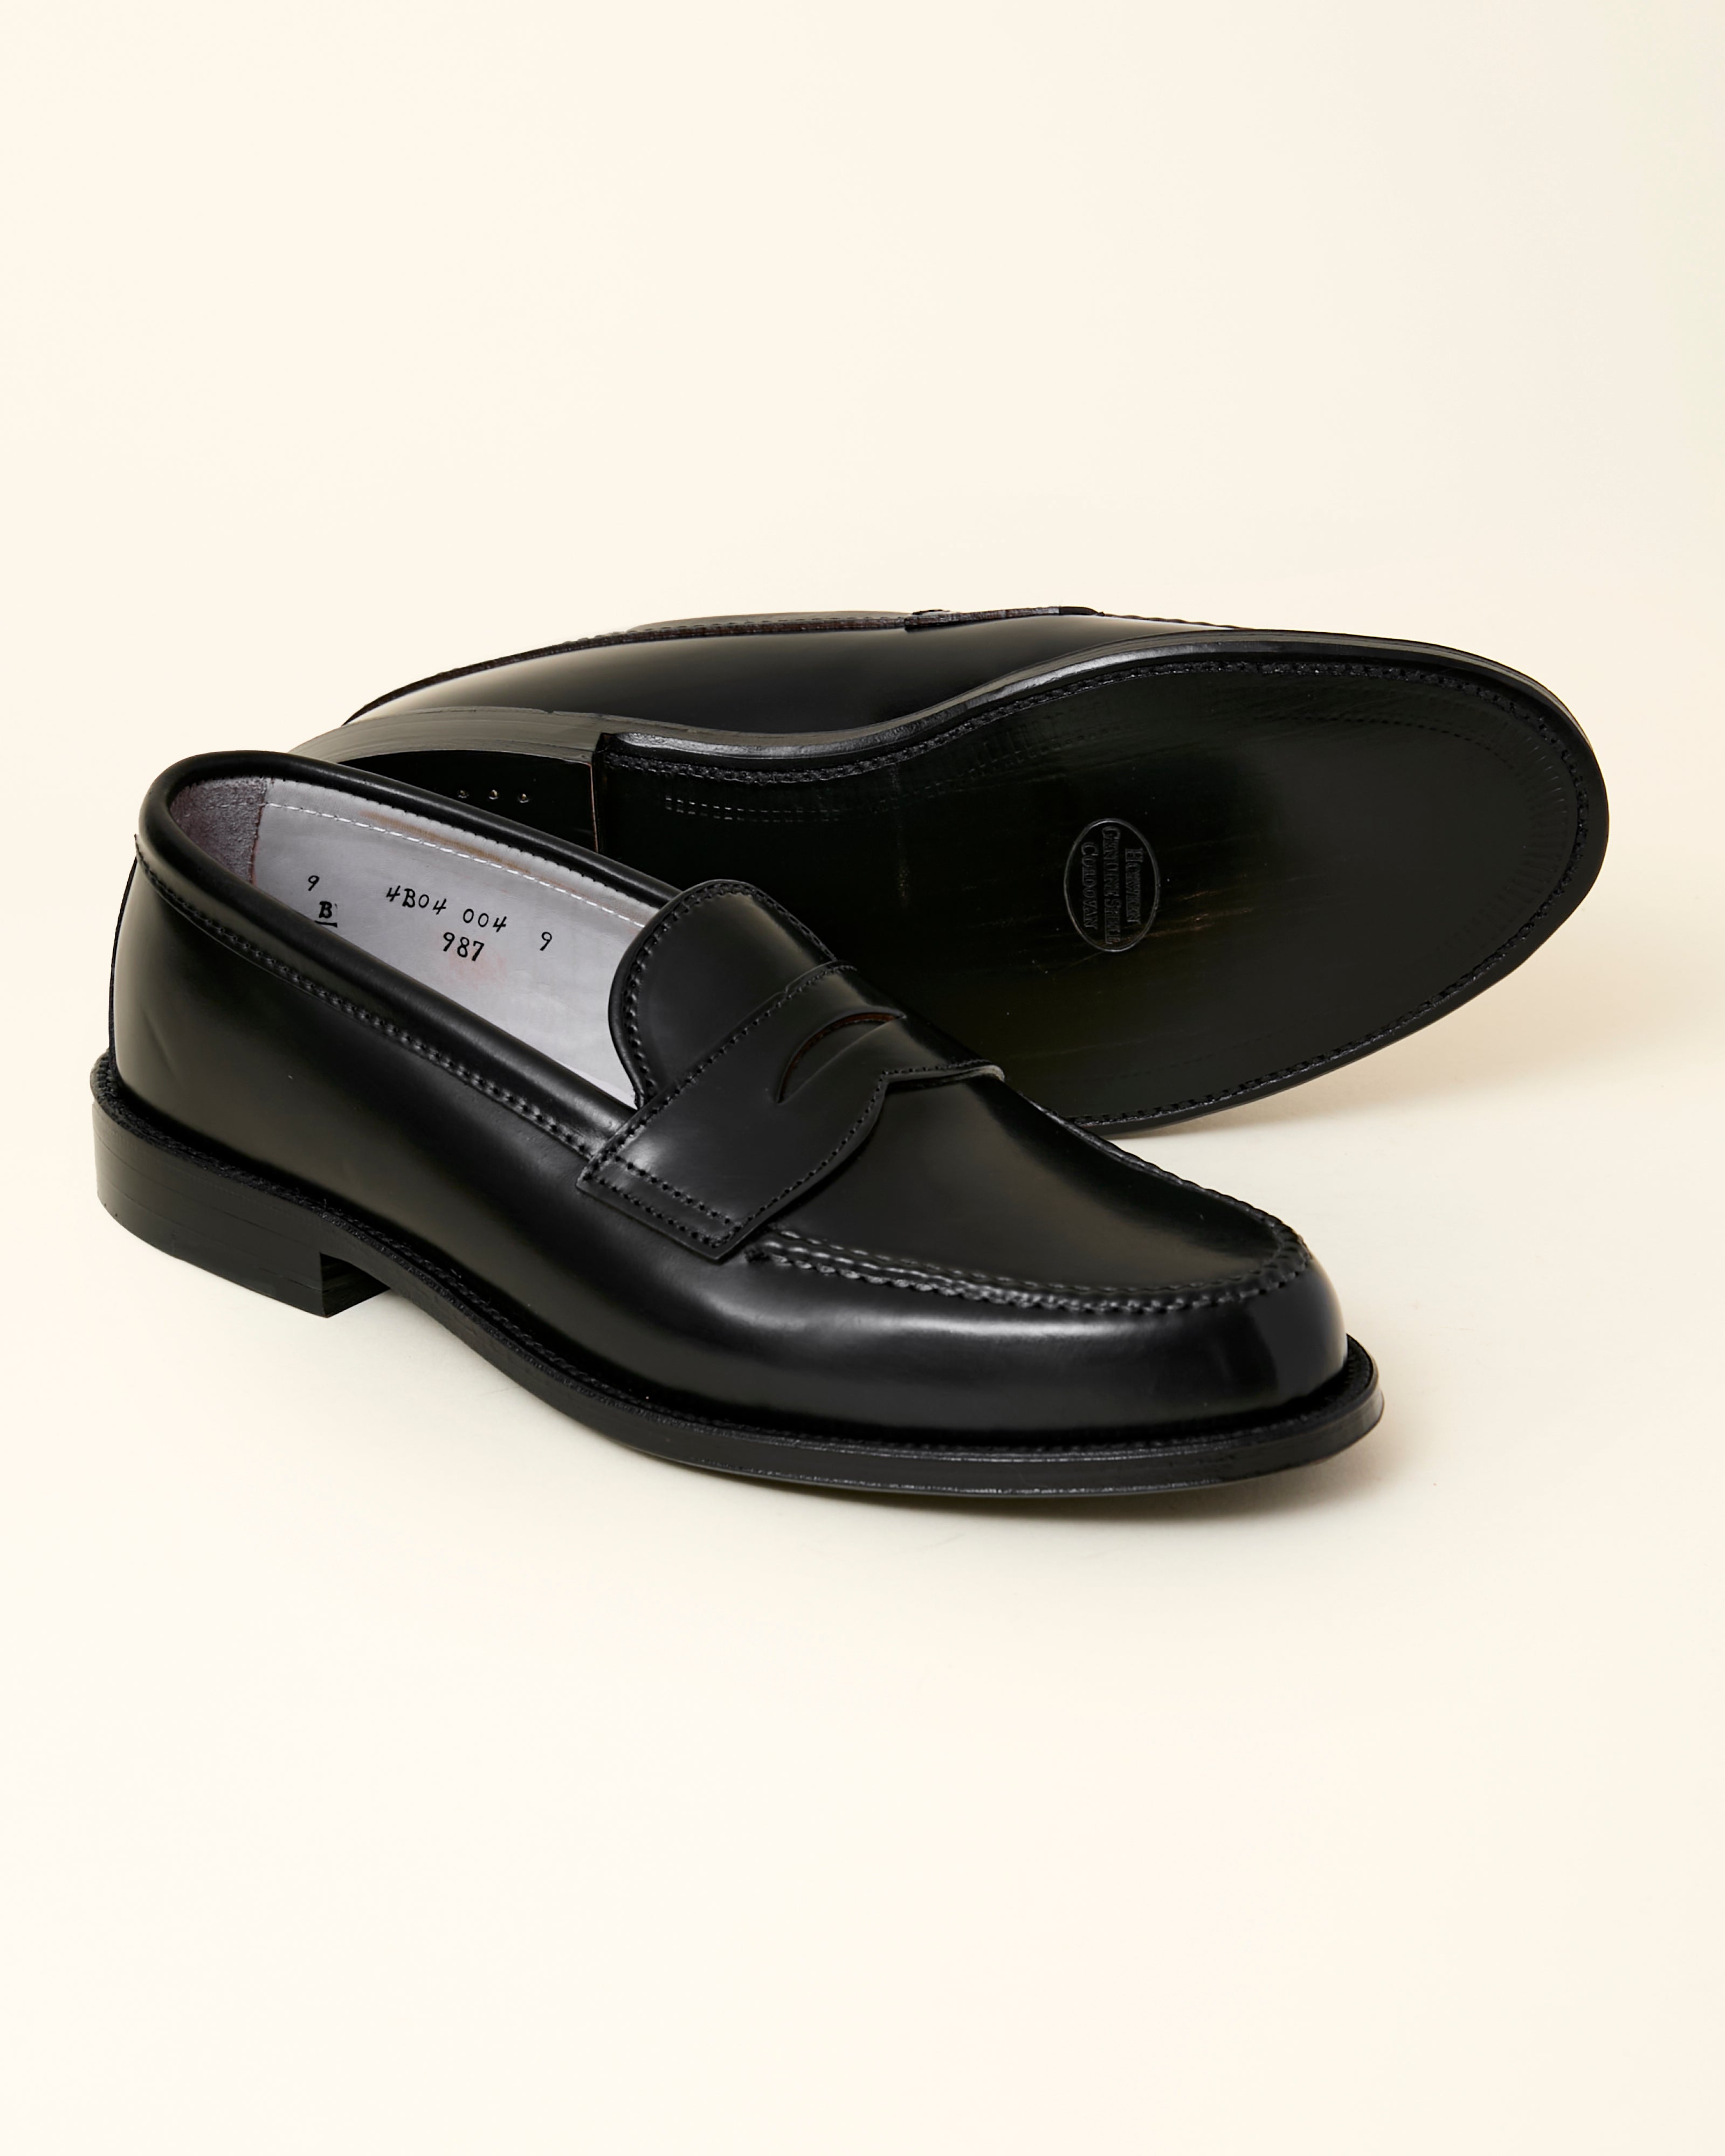 987 Leisure Handsewn Loafer in Black Shell Cordovan